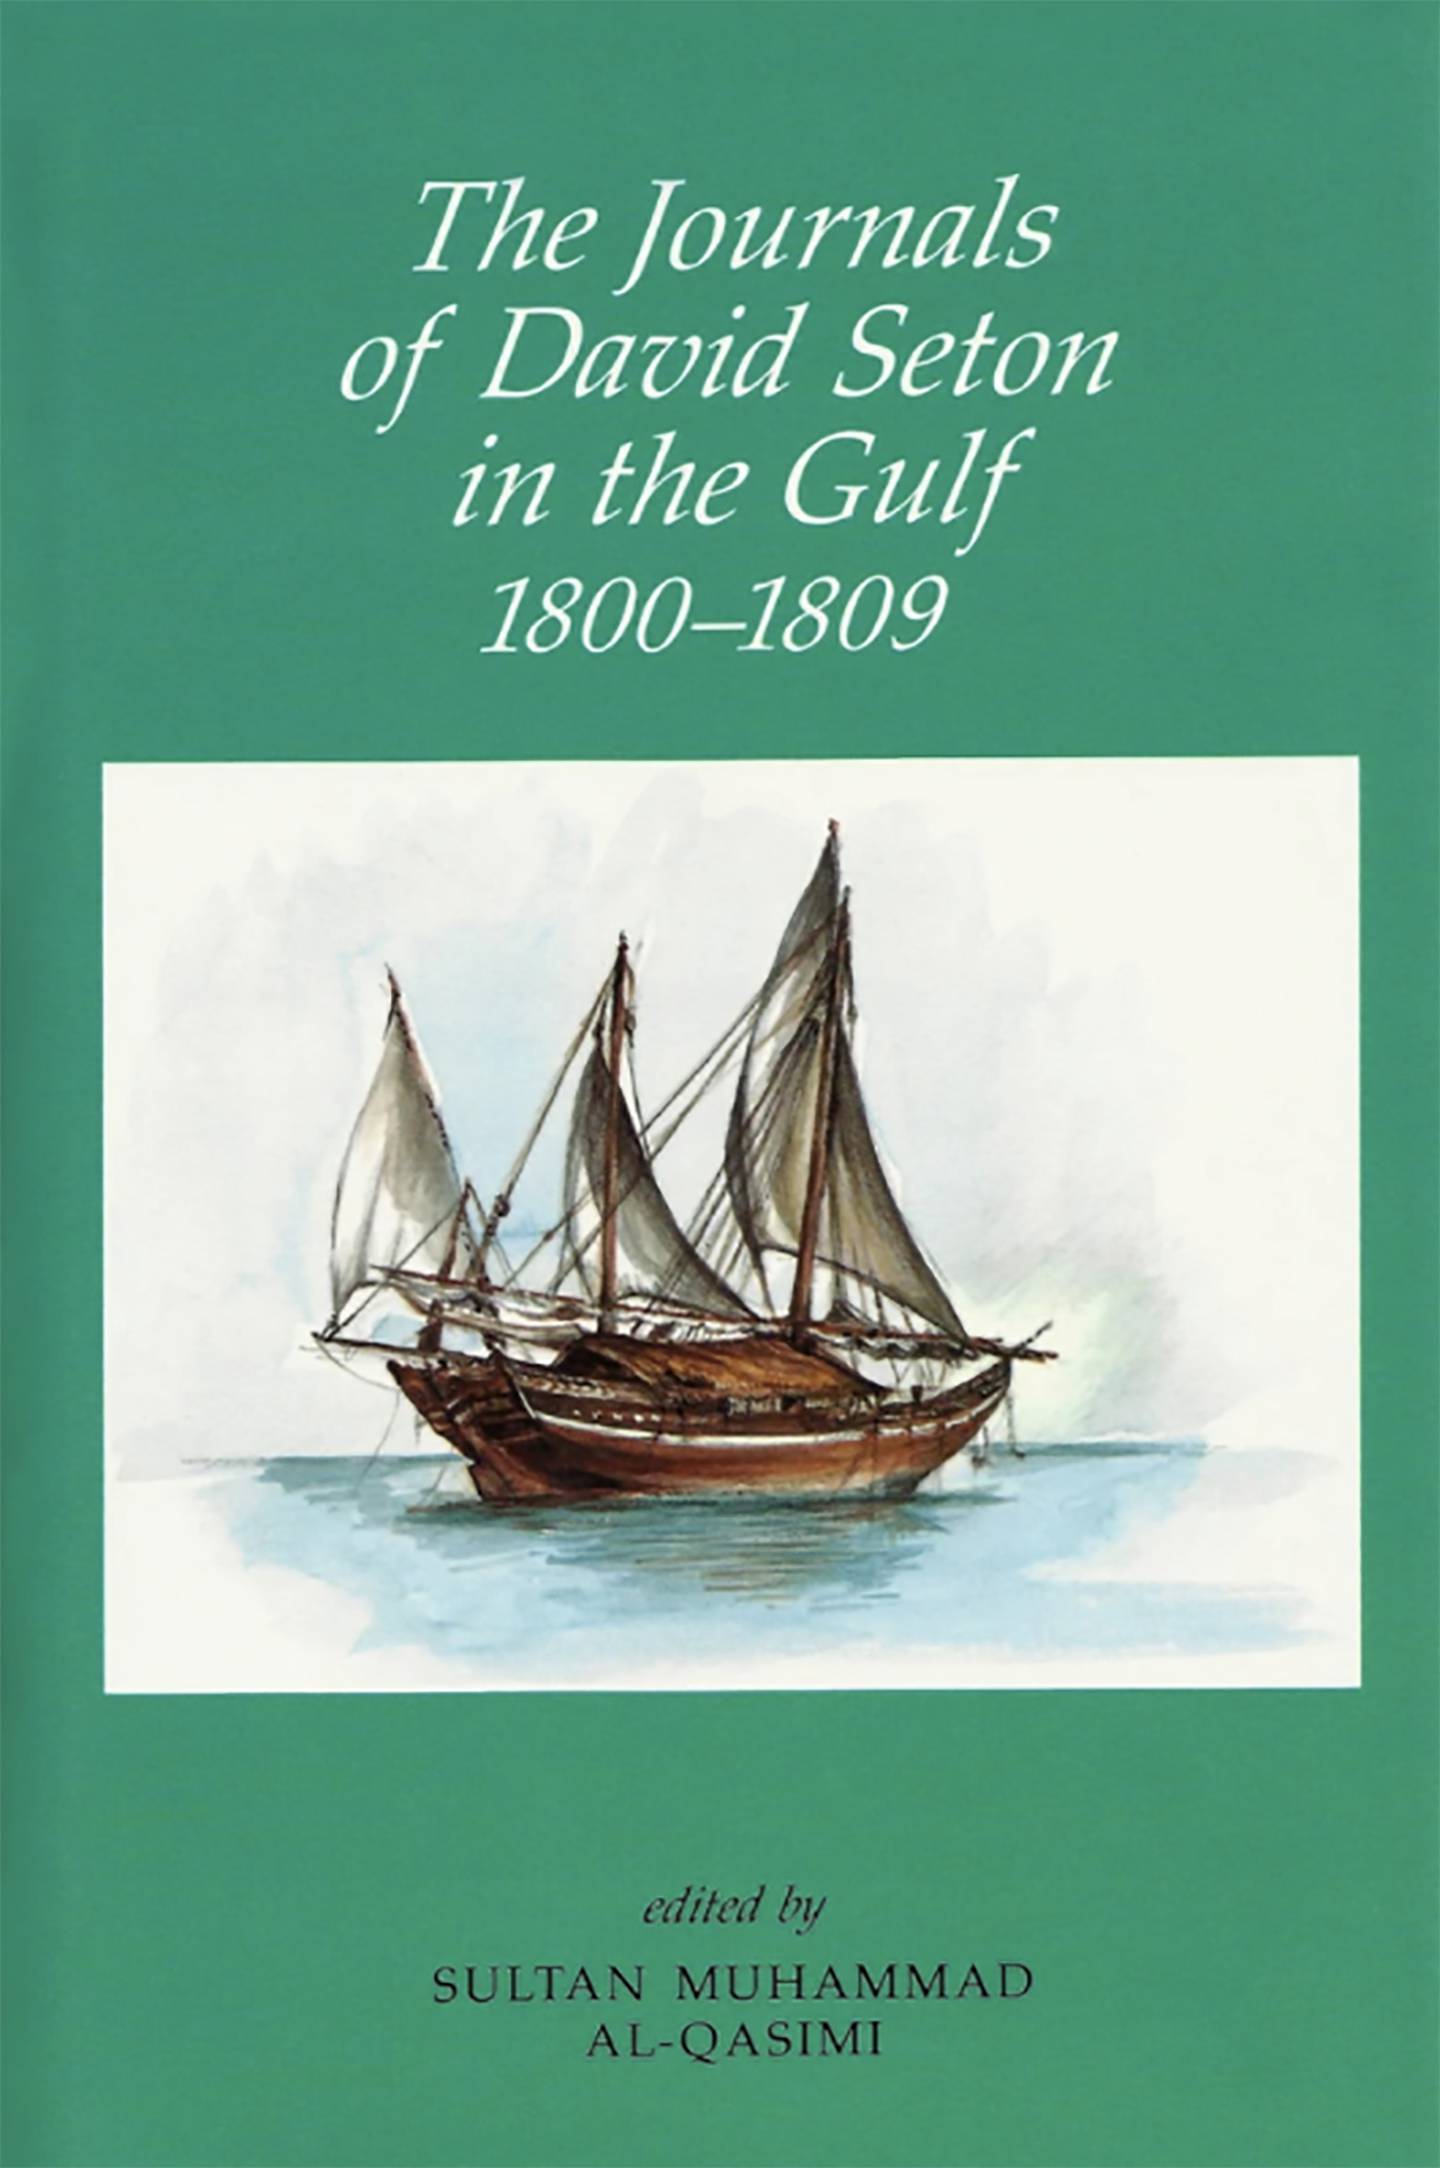 'The Journals of David Seton in the Gulf 1800-1809' throws light on the beginnings of British influence in the Arabian Gulf.